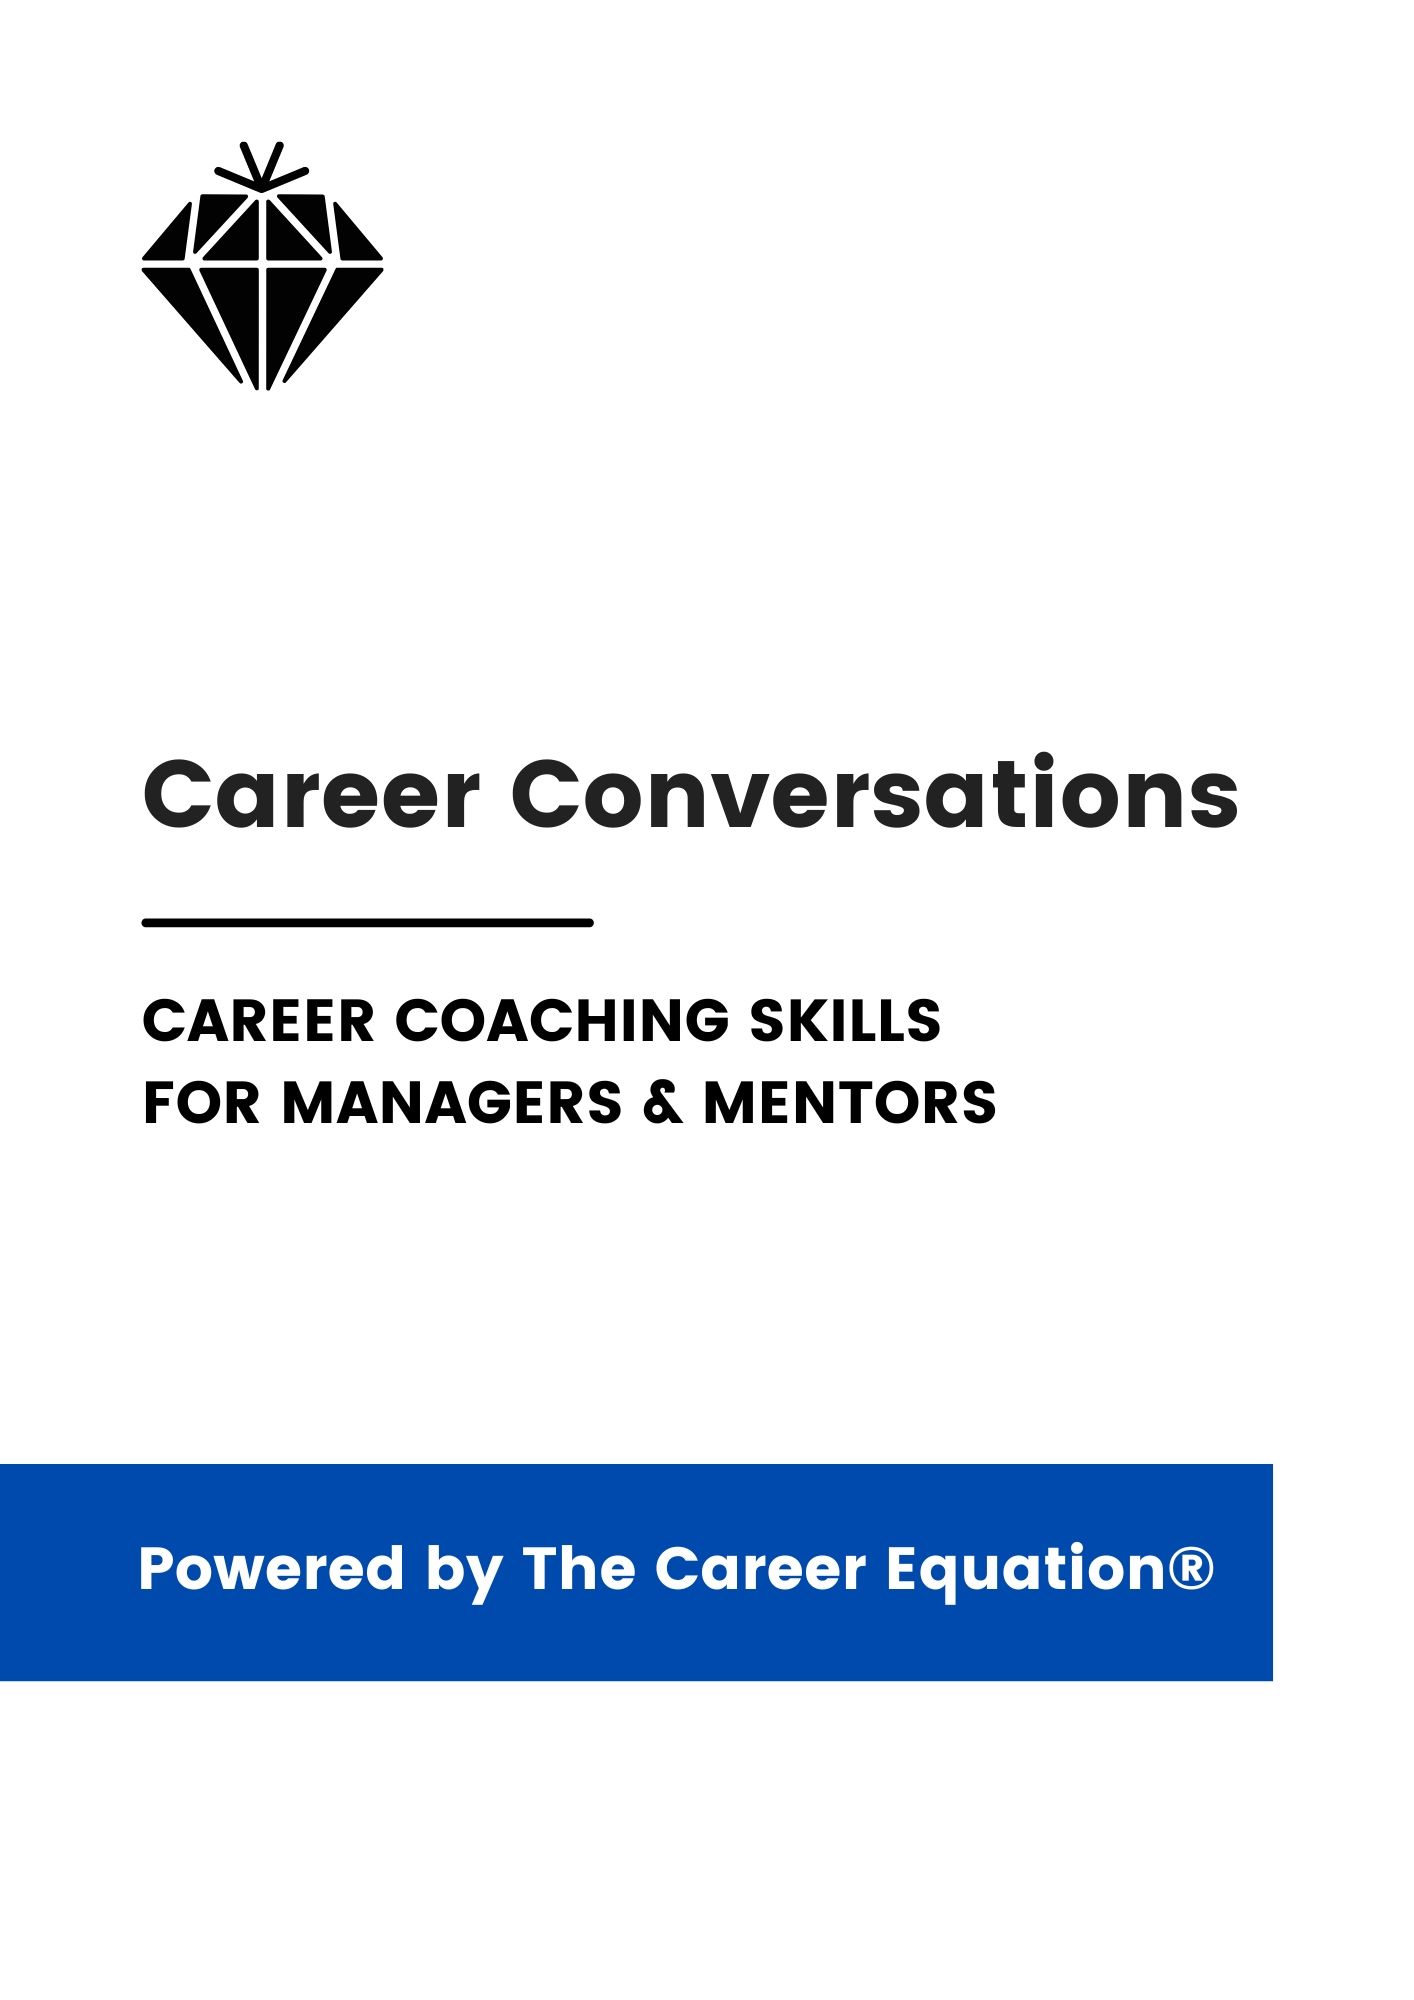 Career conversations career coaching skills for managers and mentors powered by the career equation